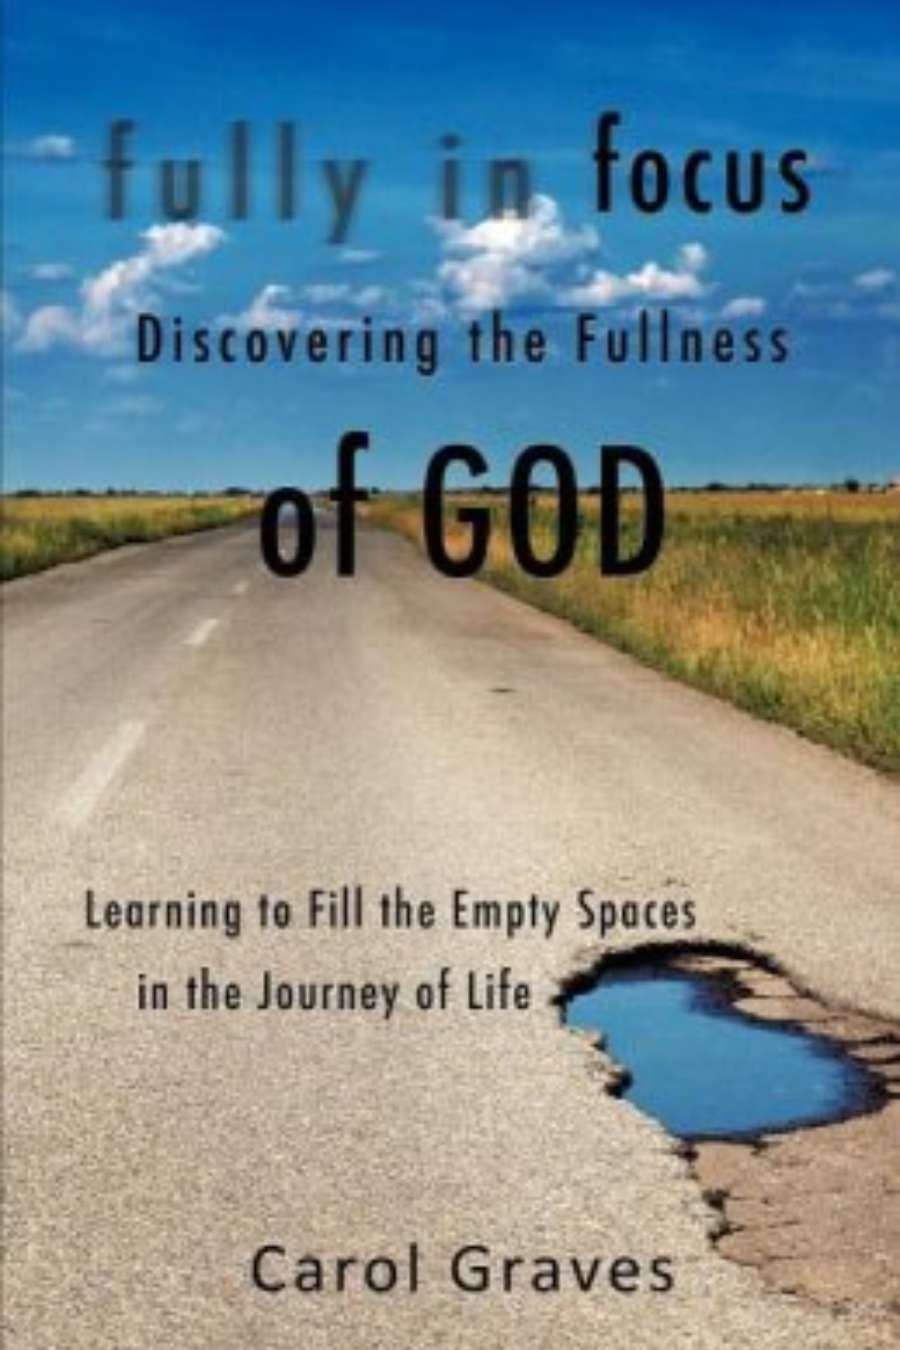 Fully in Focus - Discovering the Fullness of God     Image